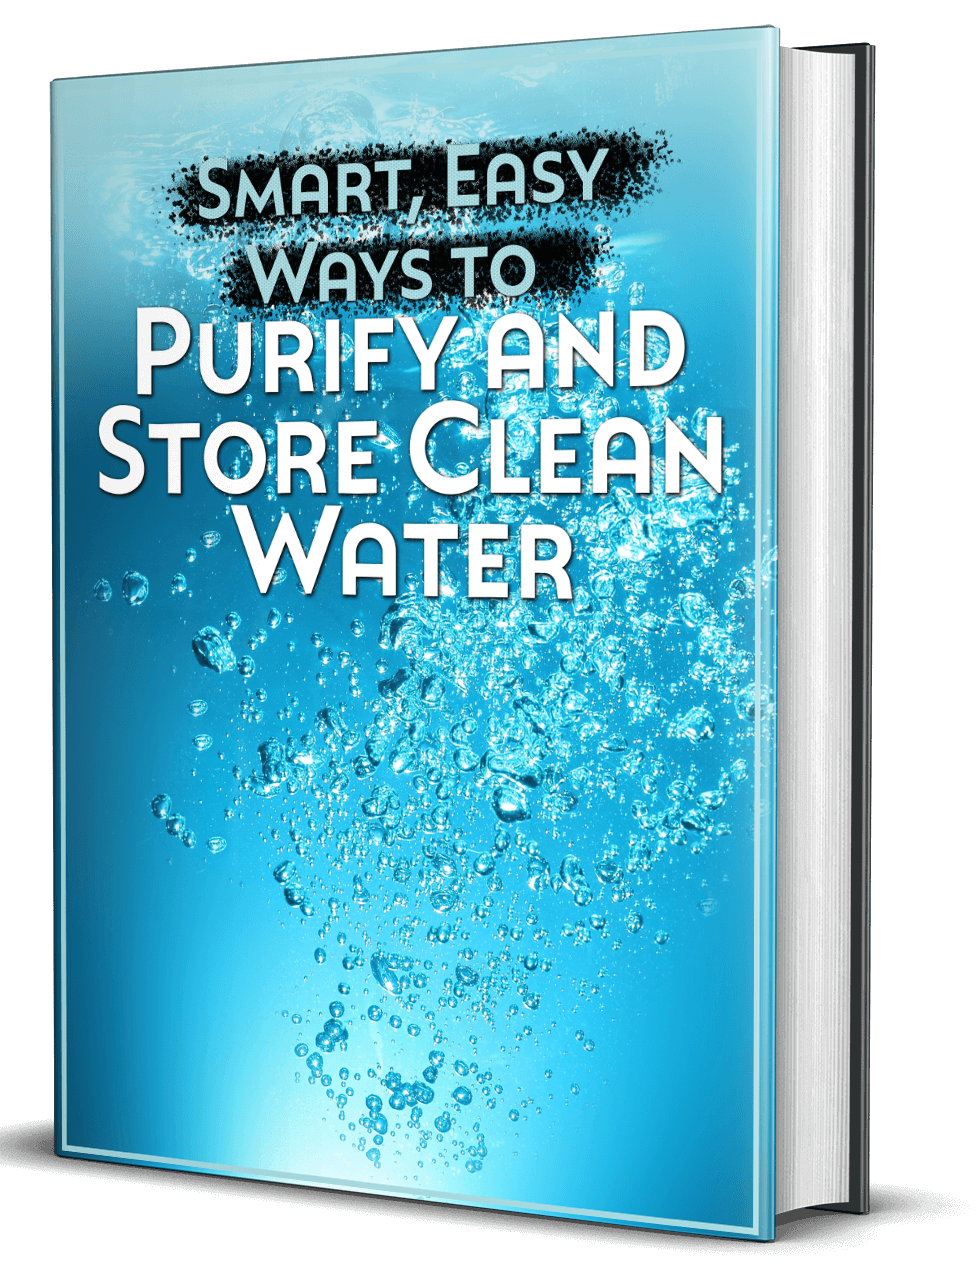 Smart and easy ways to purify and store clean water